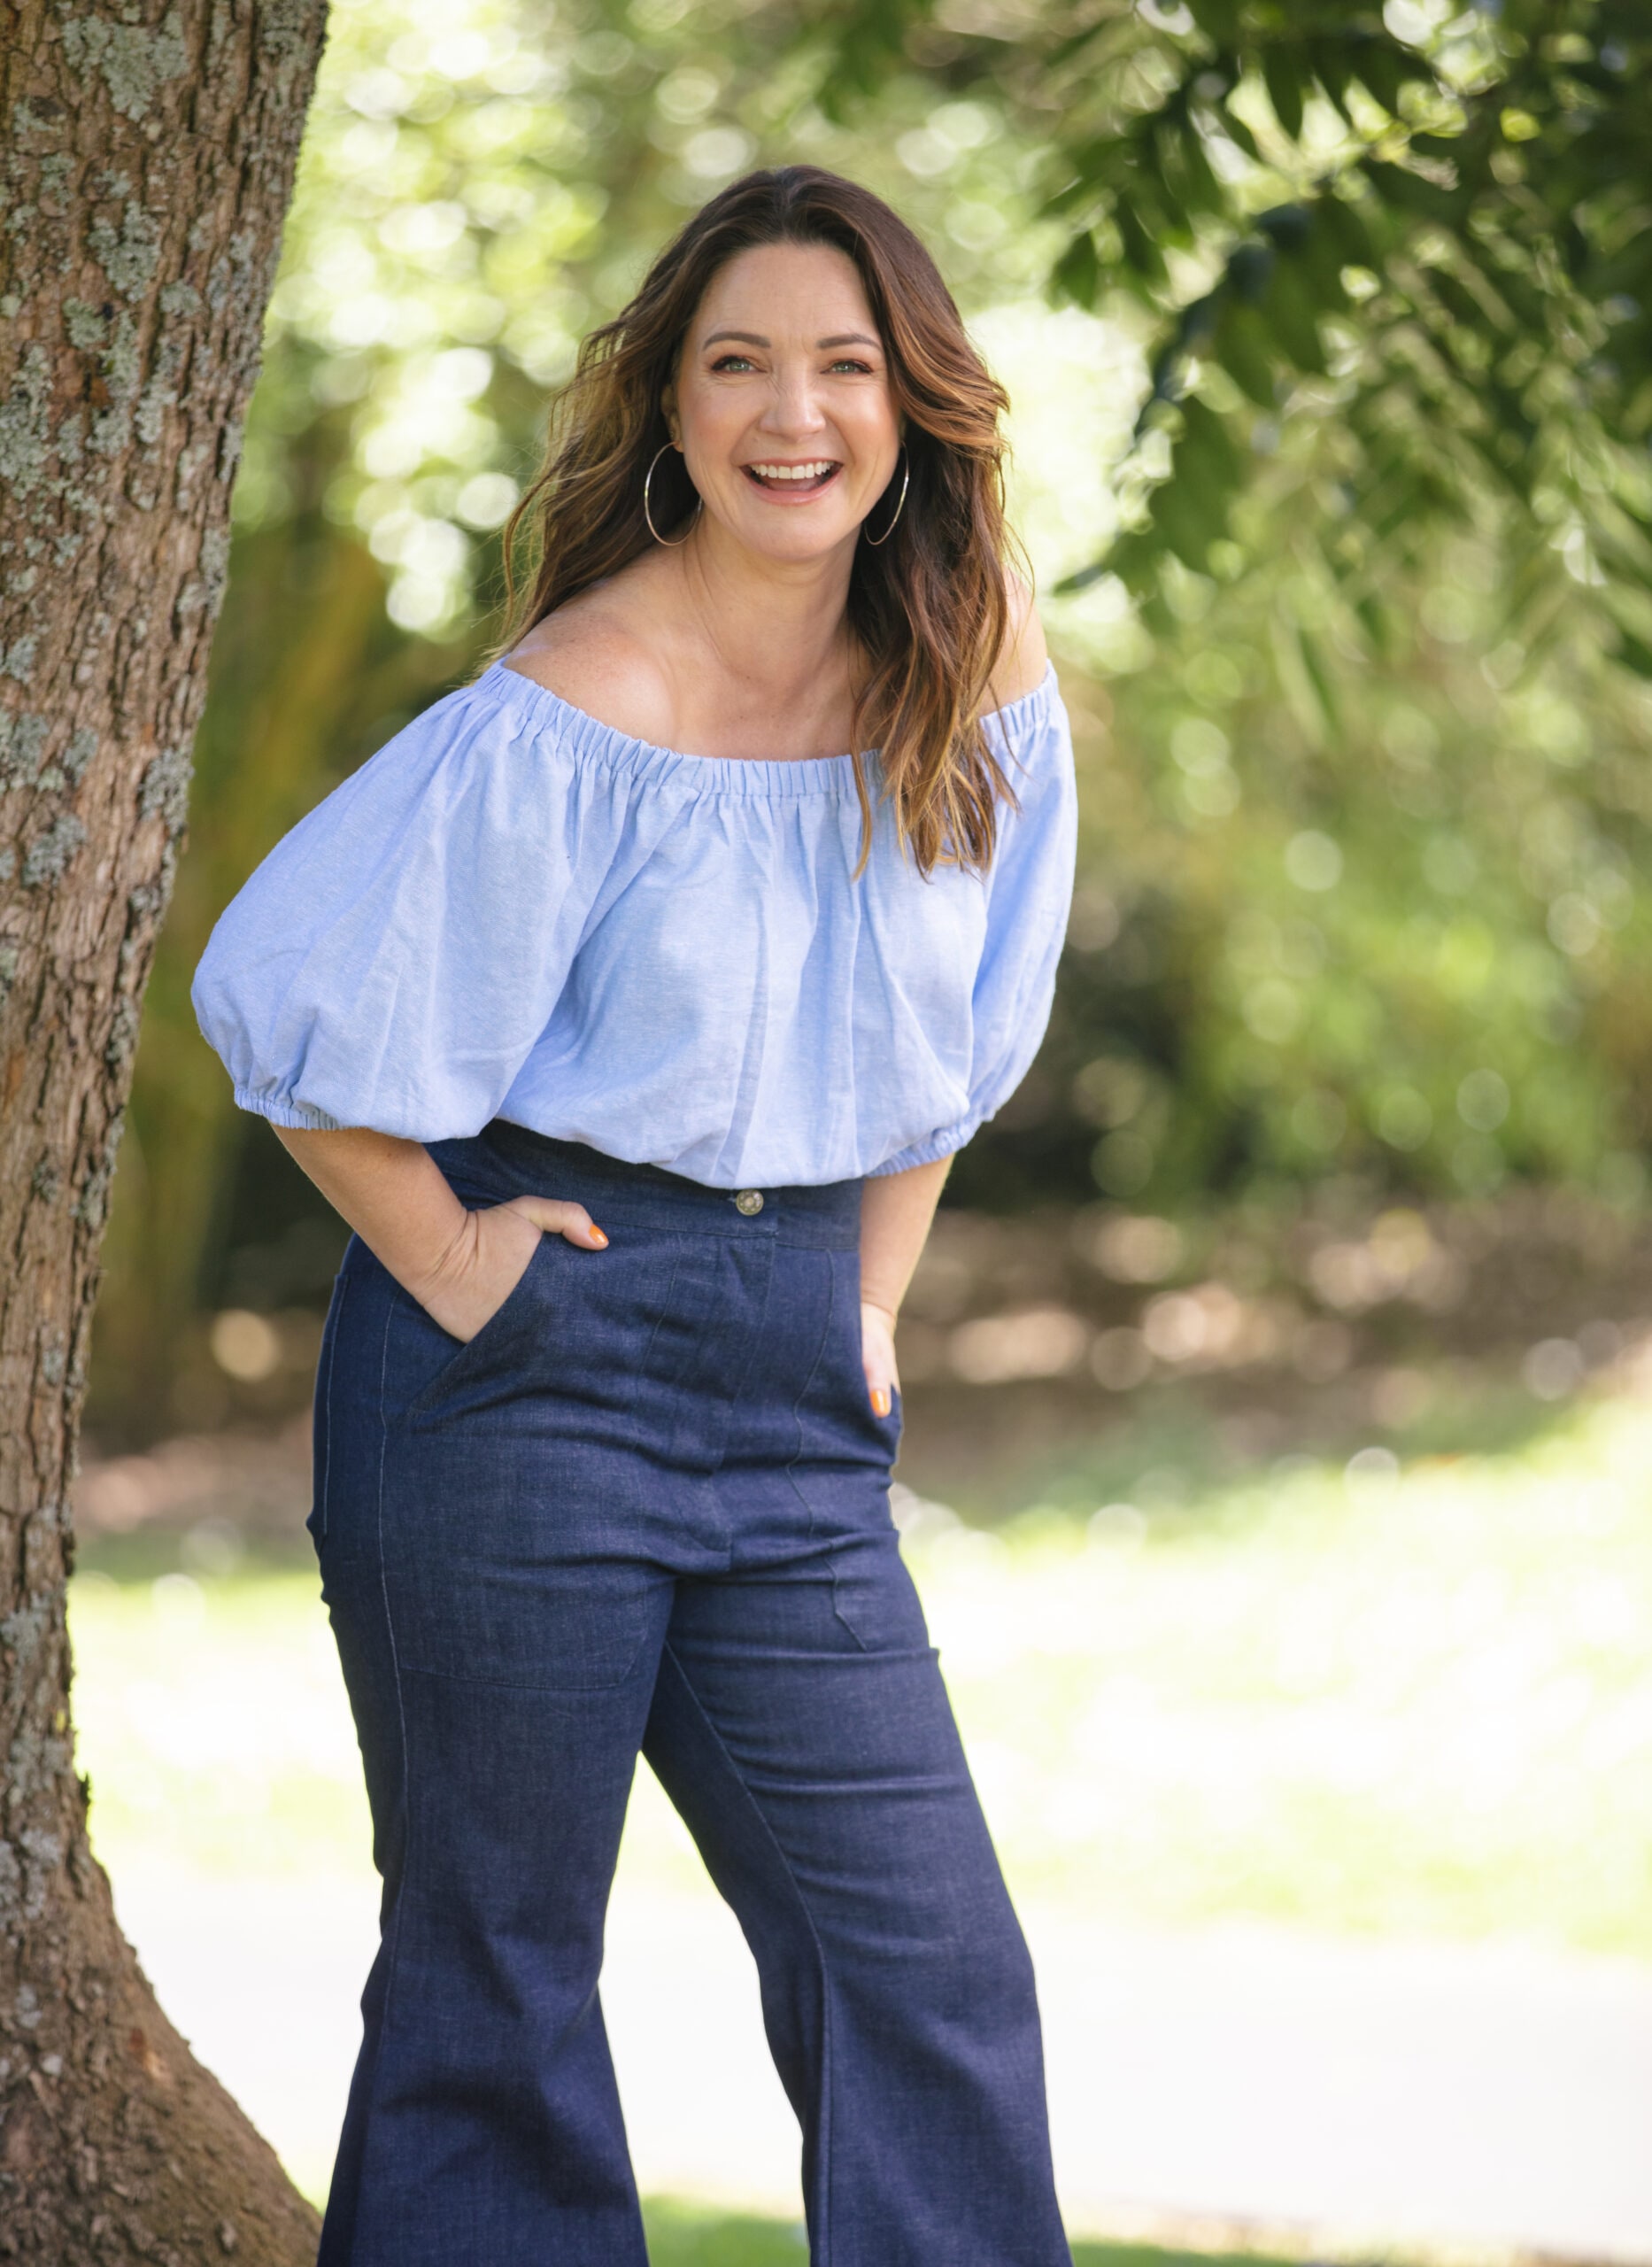 Claire Chitham laughing while wearing blue top 